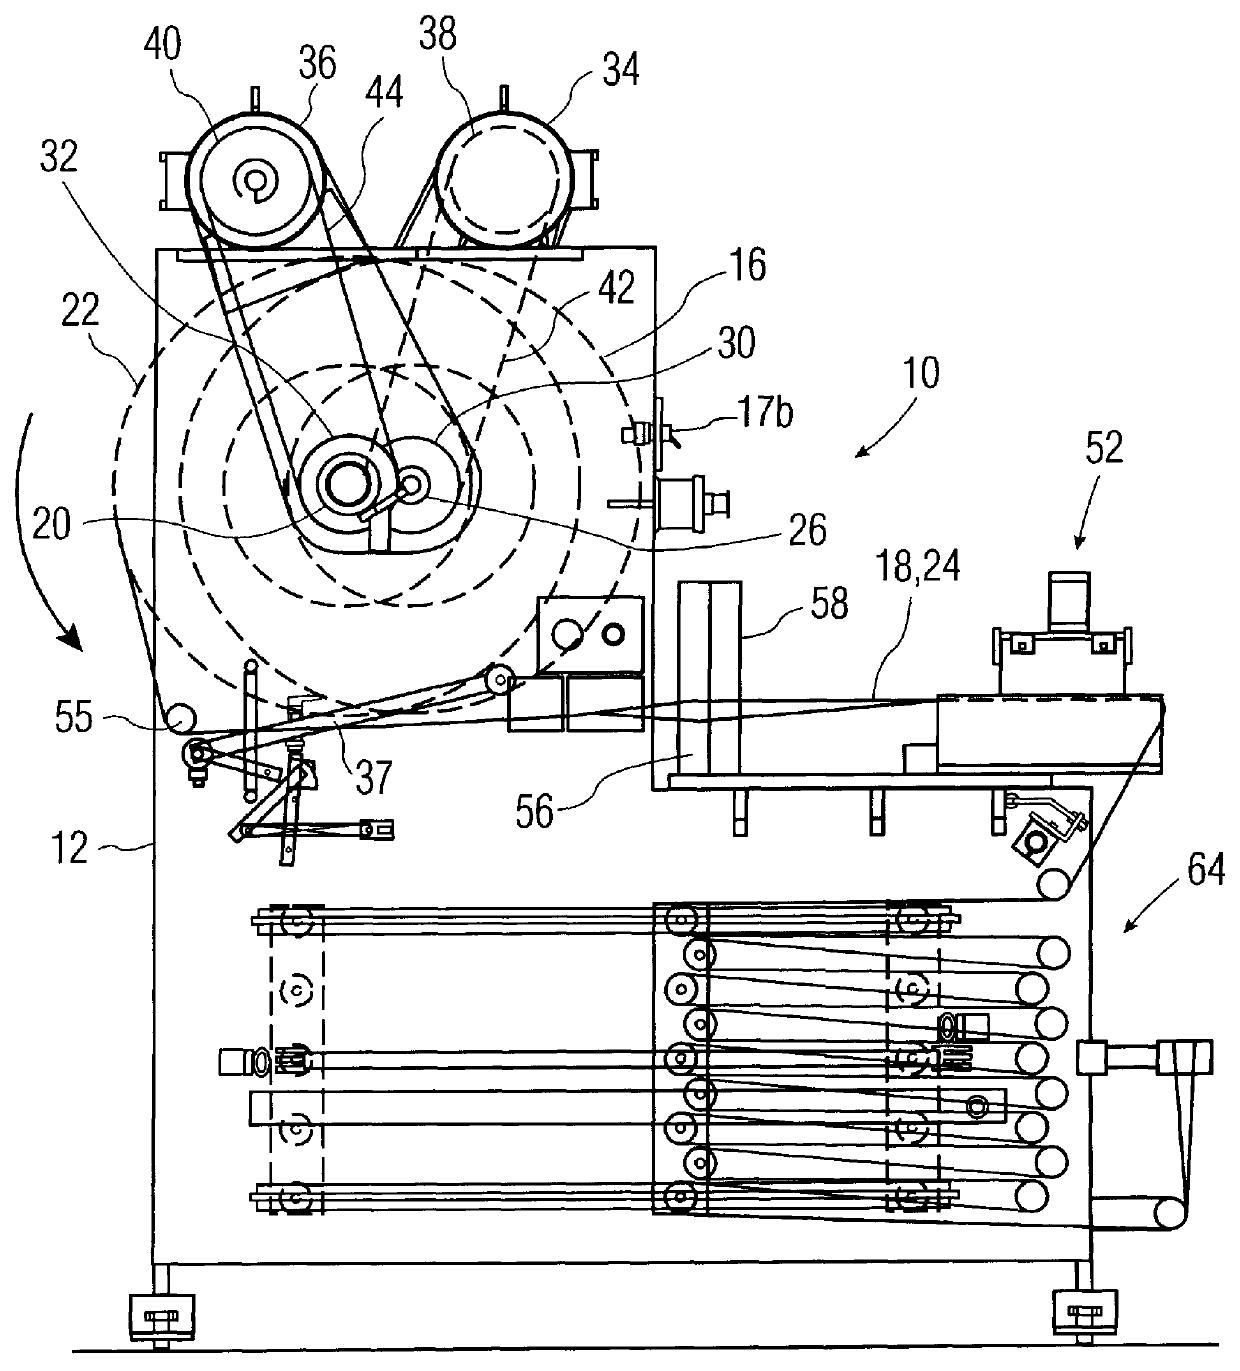 Lap splicing apparatus with the trailing tail end of the splice always on the same side